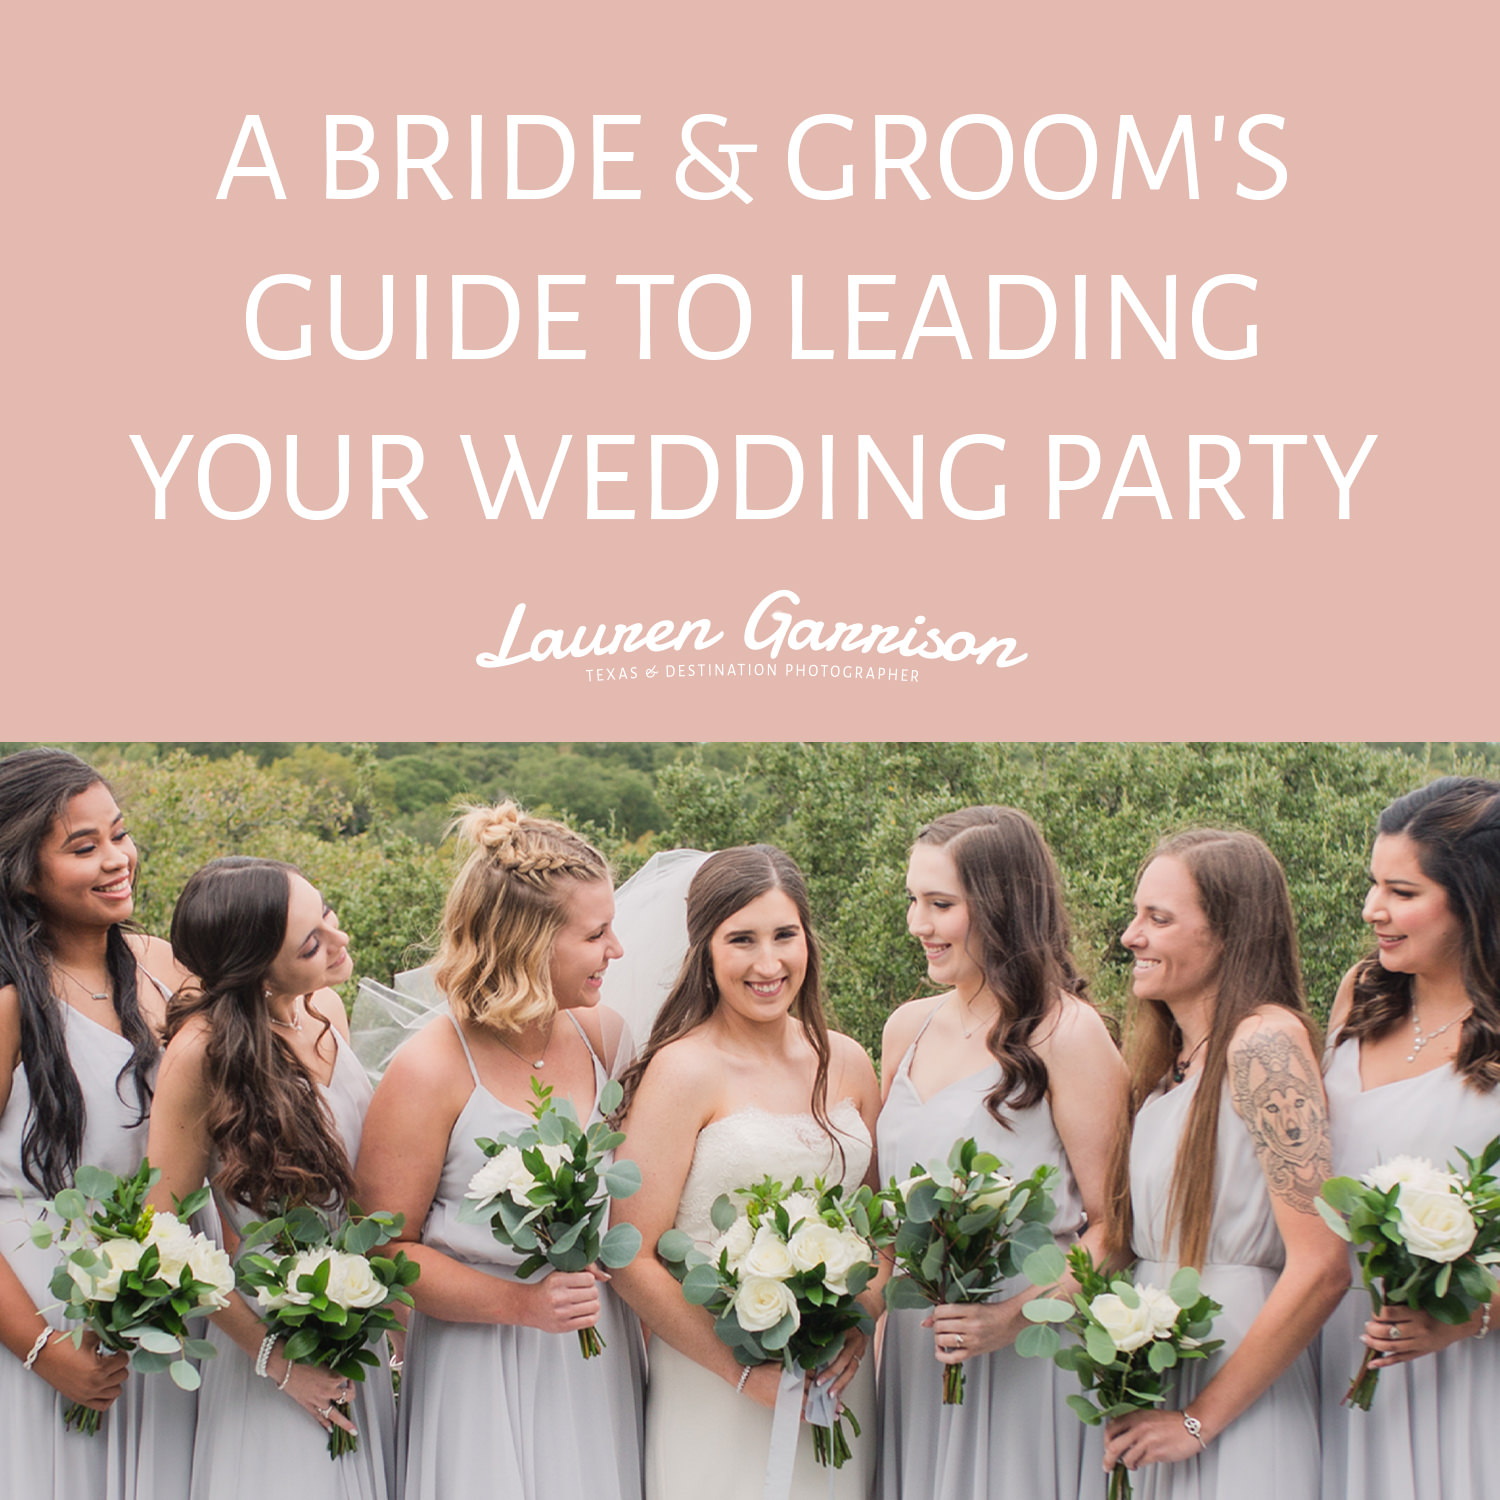 4 Ways to Keep your Bridal Party Small, Wedding Advice